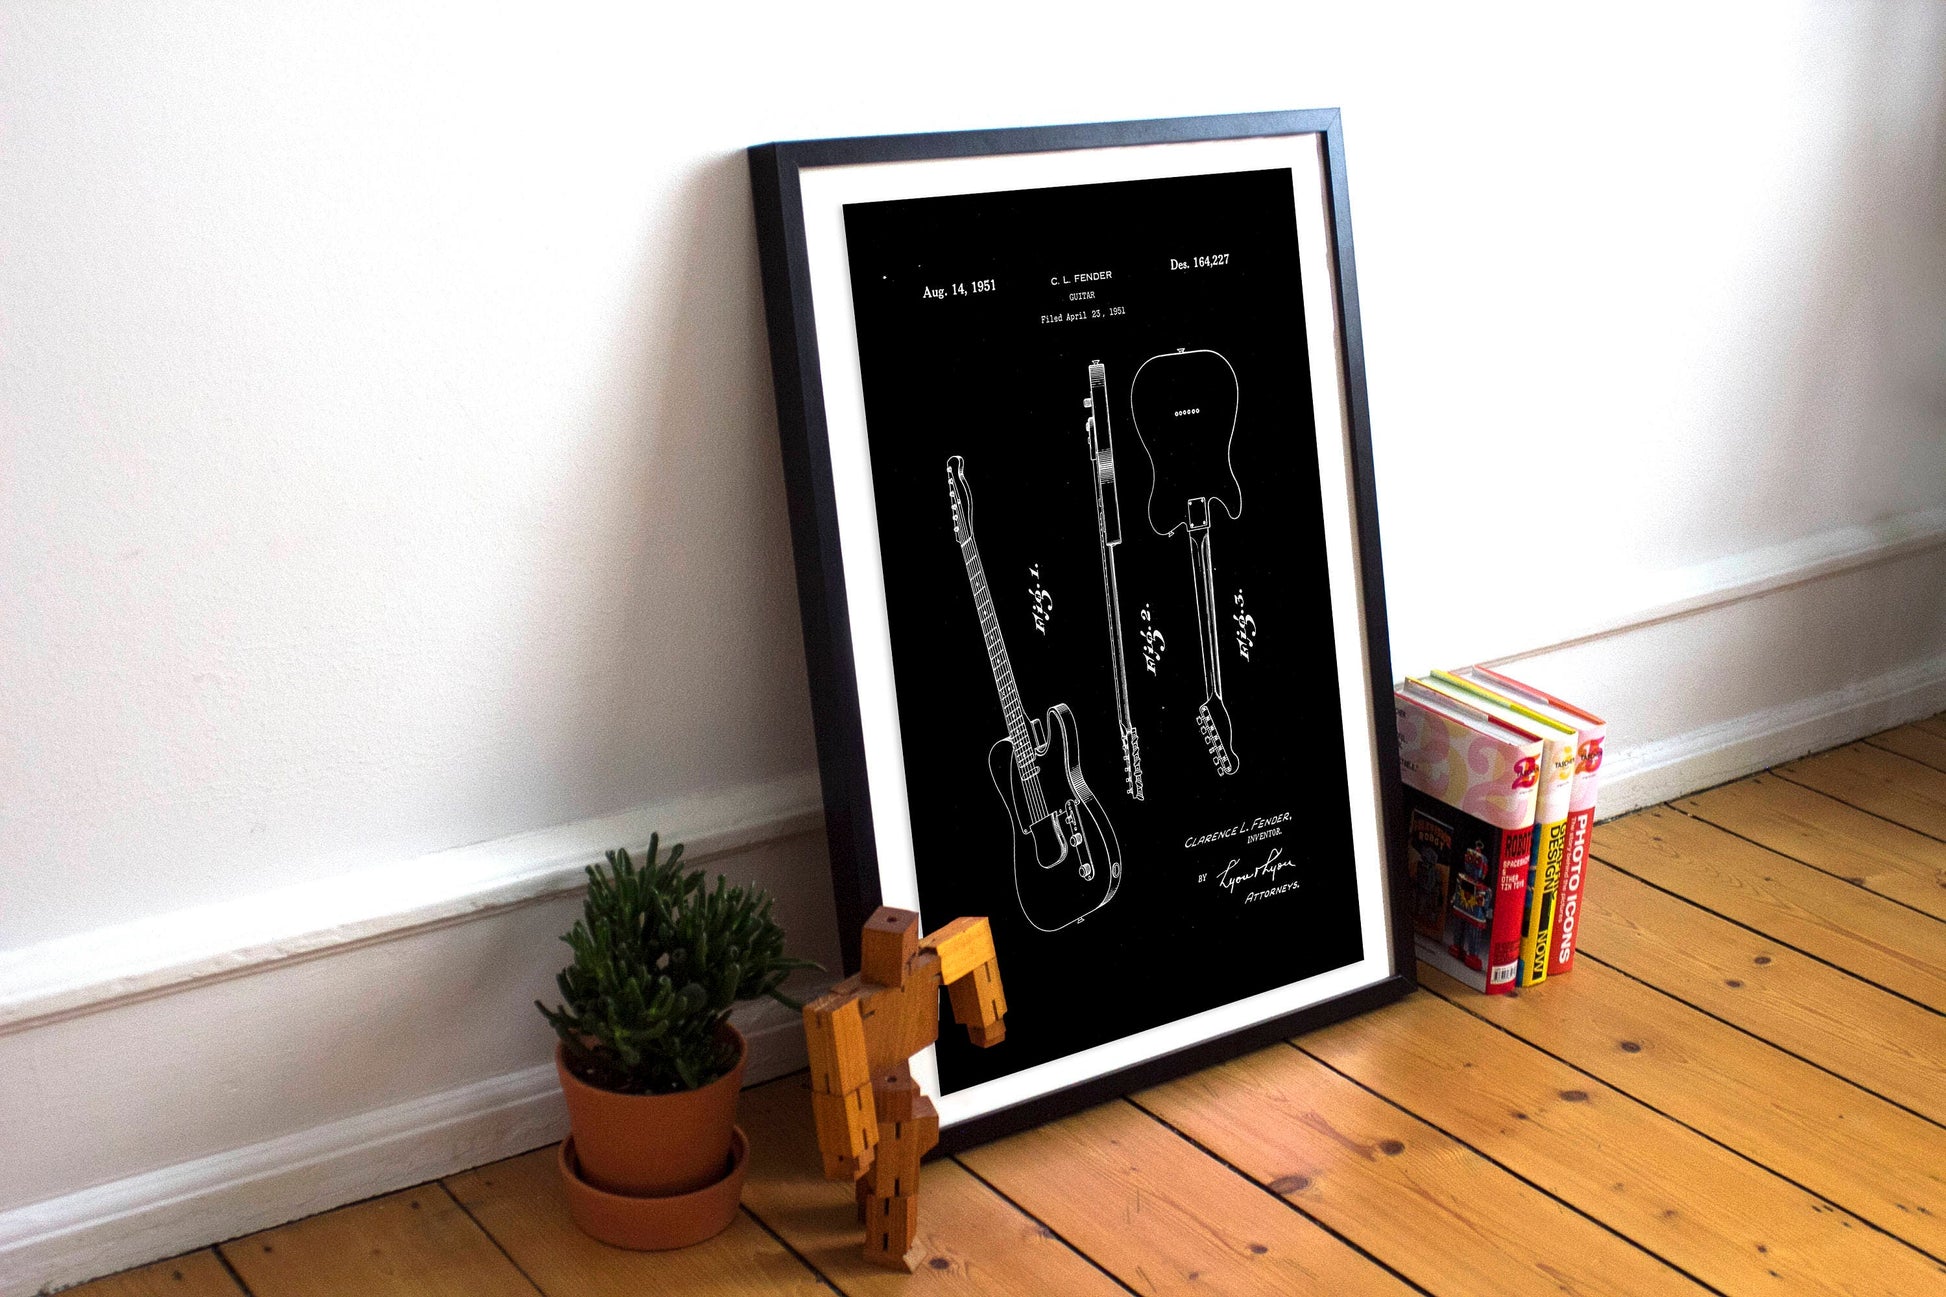 Telecaster Electric Guitar Patent Wall Art Print, Patent Art, Blueprint, Patent Print, Patent Poster, gift for dad